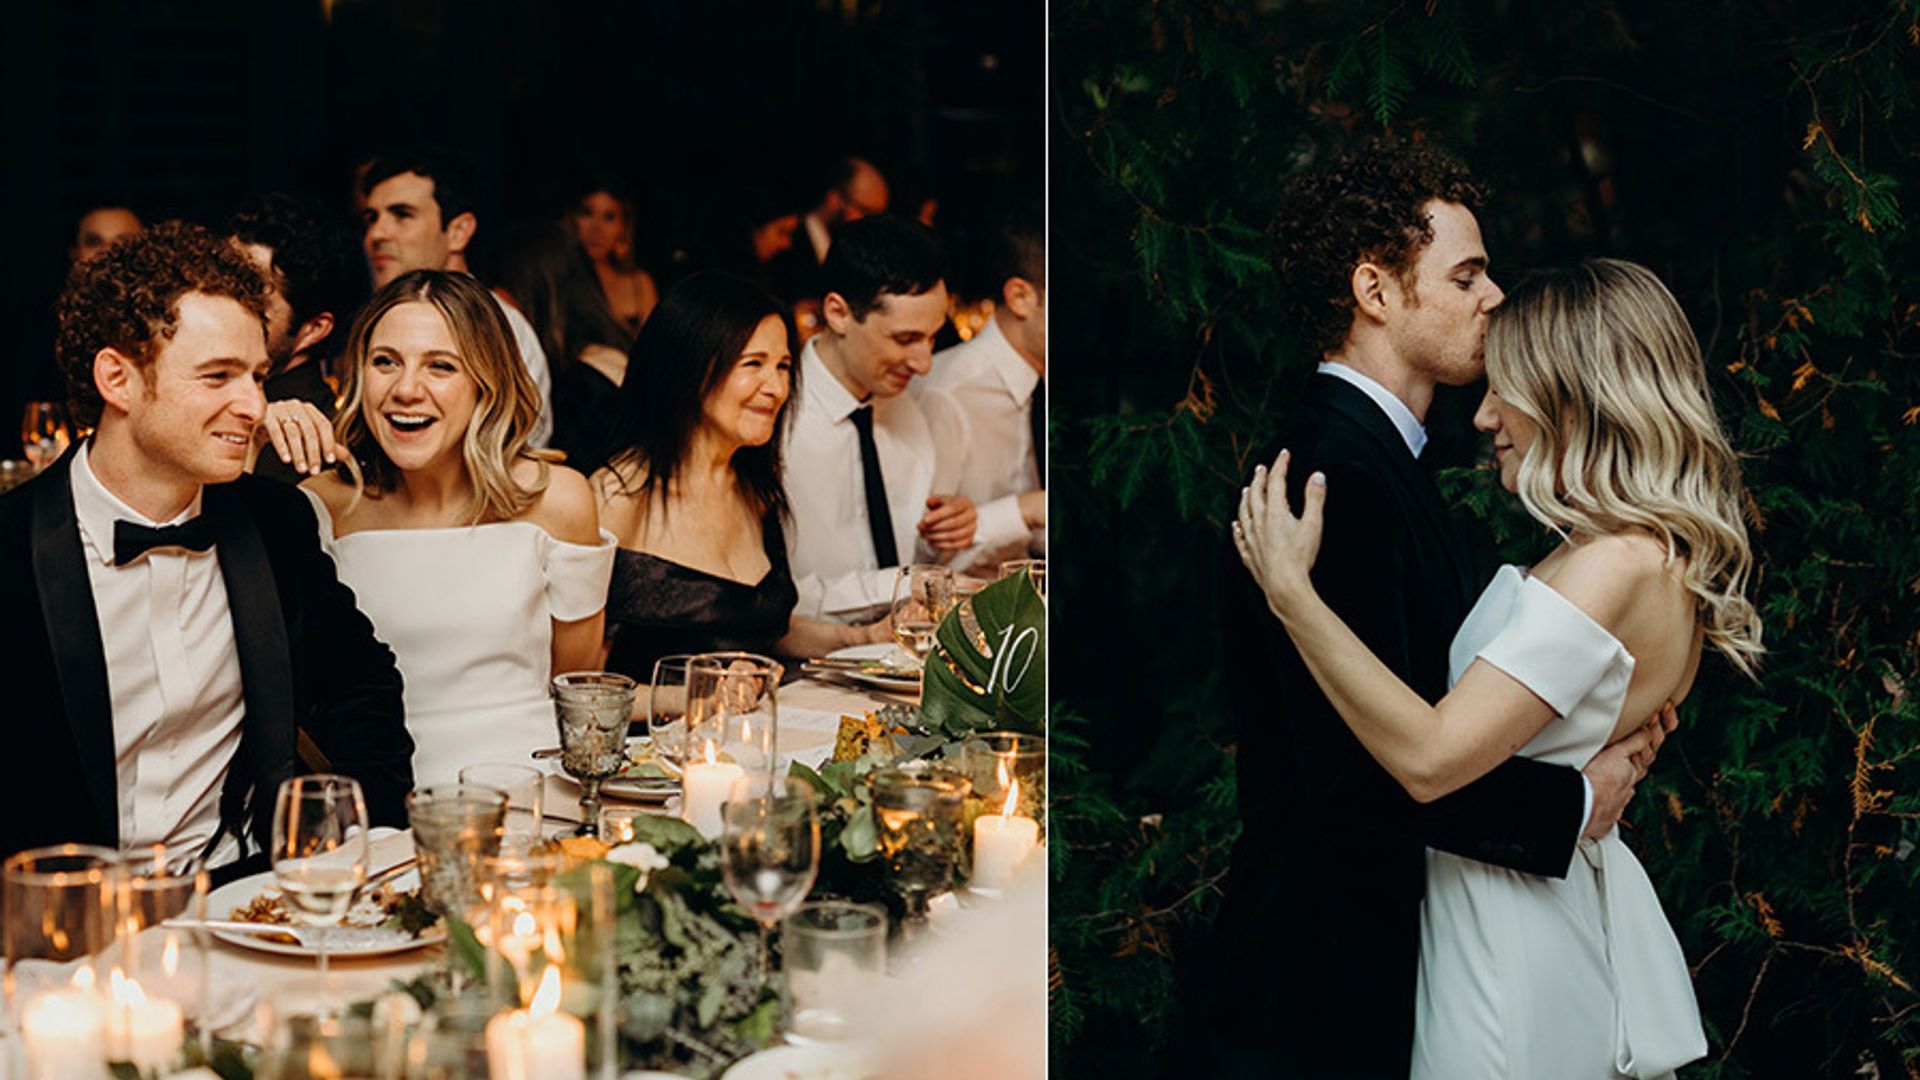 Lauren Collins and Jonathan Malen say 'I do' in dreamy and intimate Toronto wedding